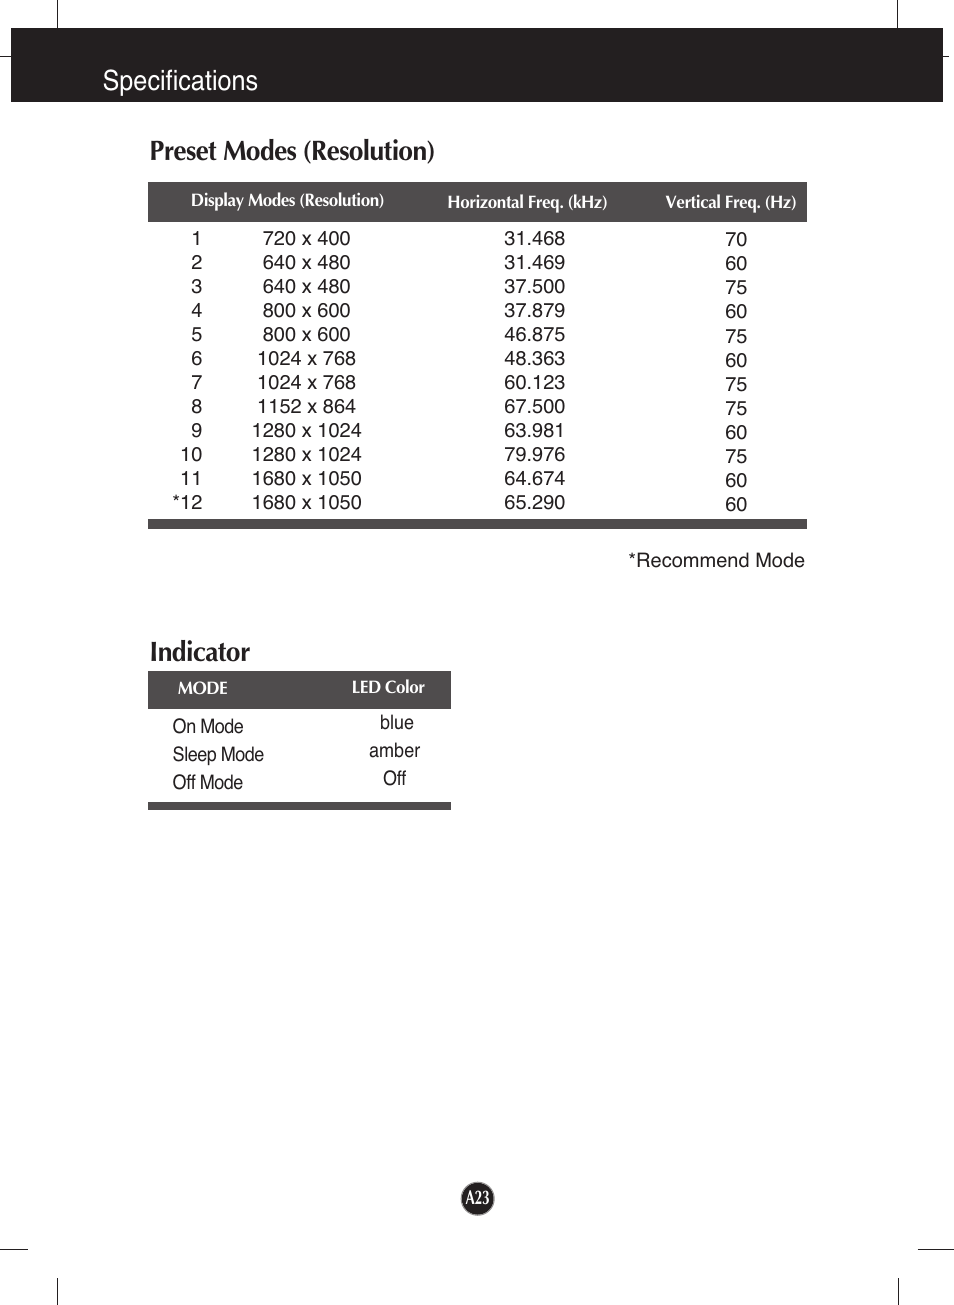 Preset modes (resolution), Indicator, Specifications preset modes (resolution) | LG L226WTQ-WF User Manual | Page 24 / 26